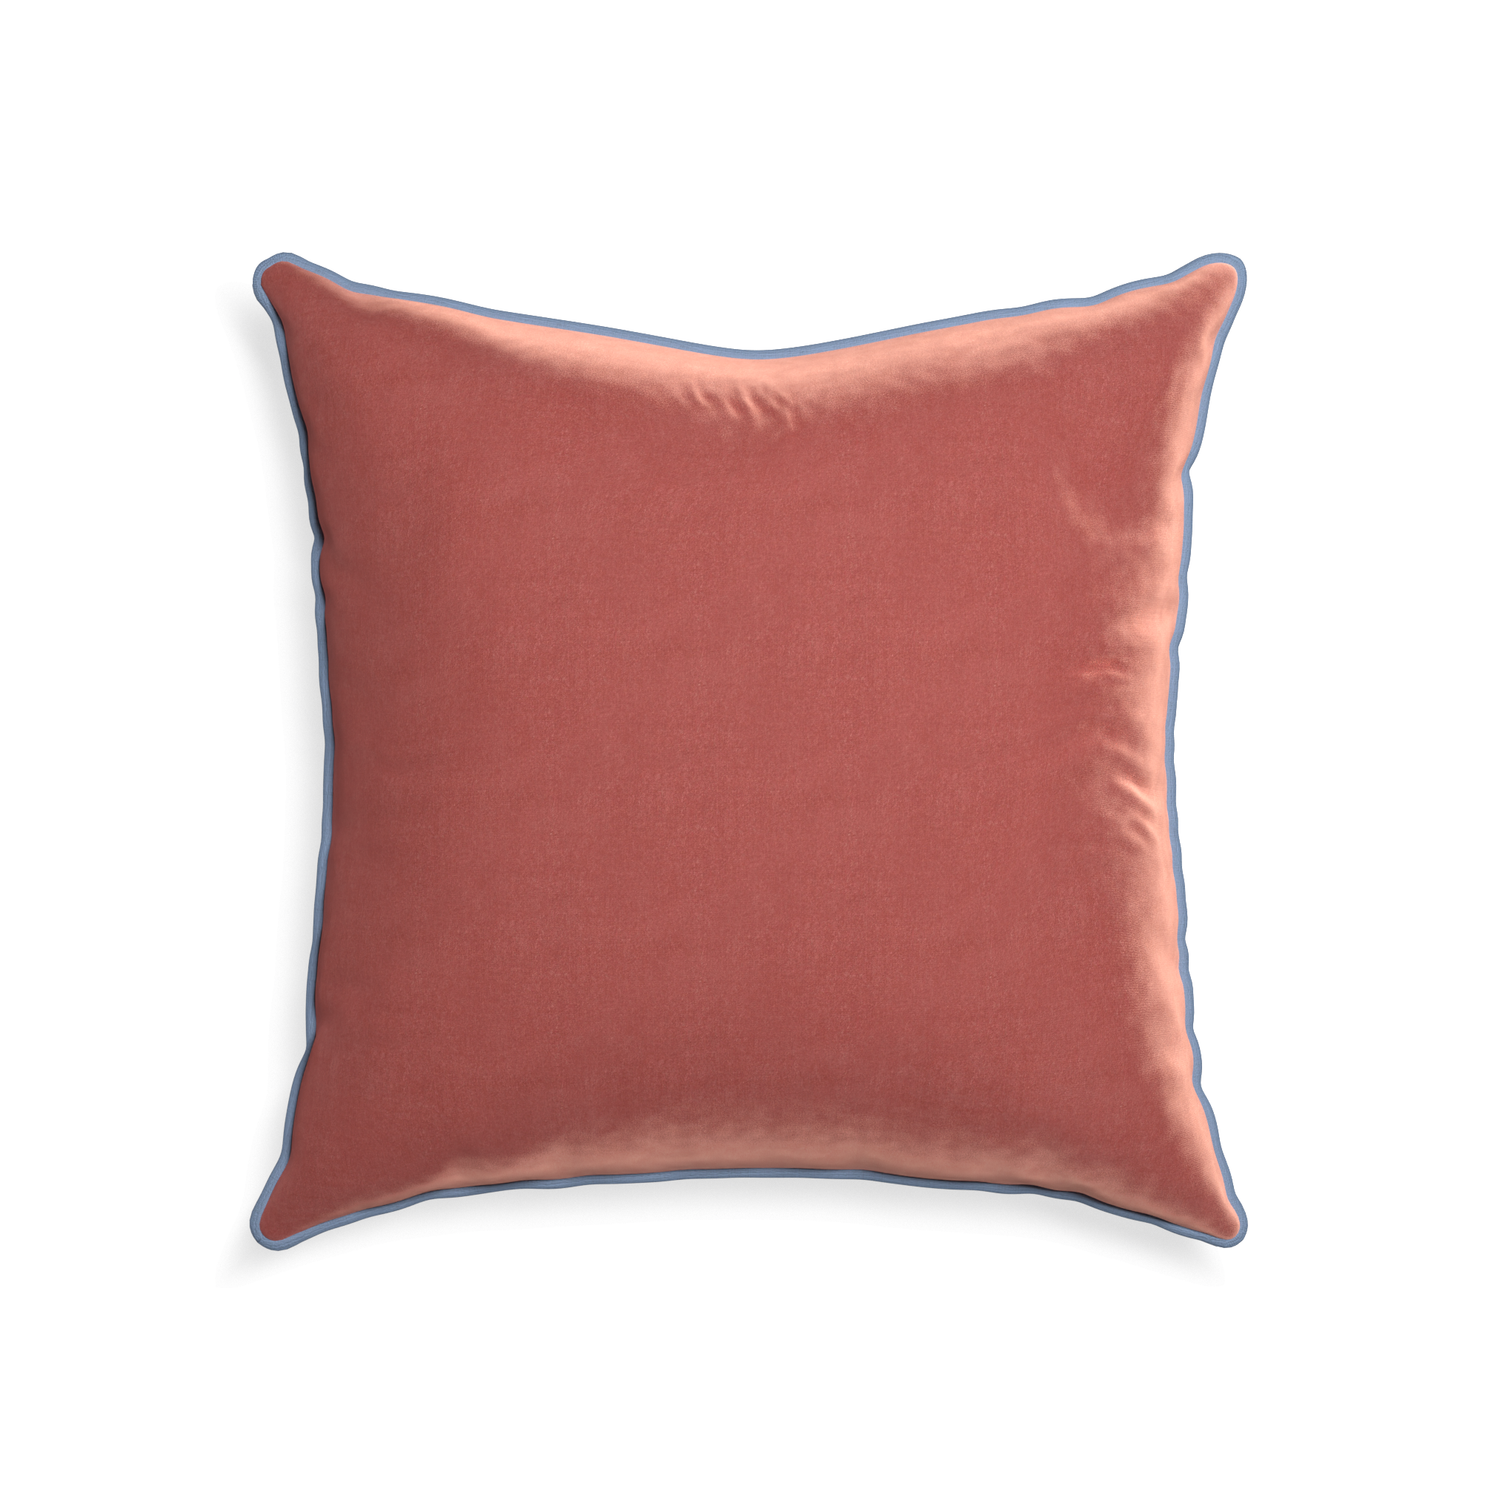 square coral velvet pillow with sky blue piping